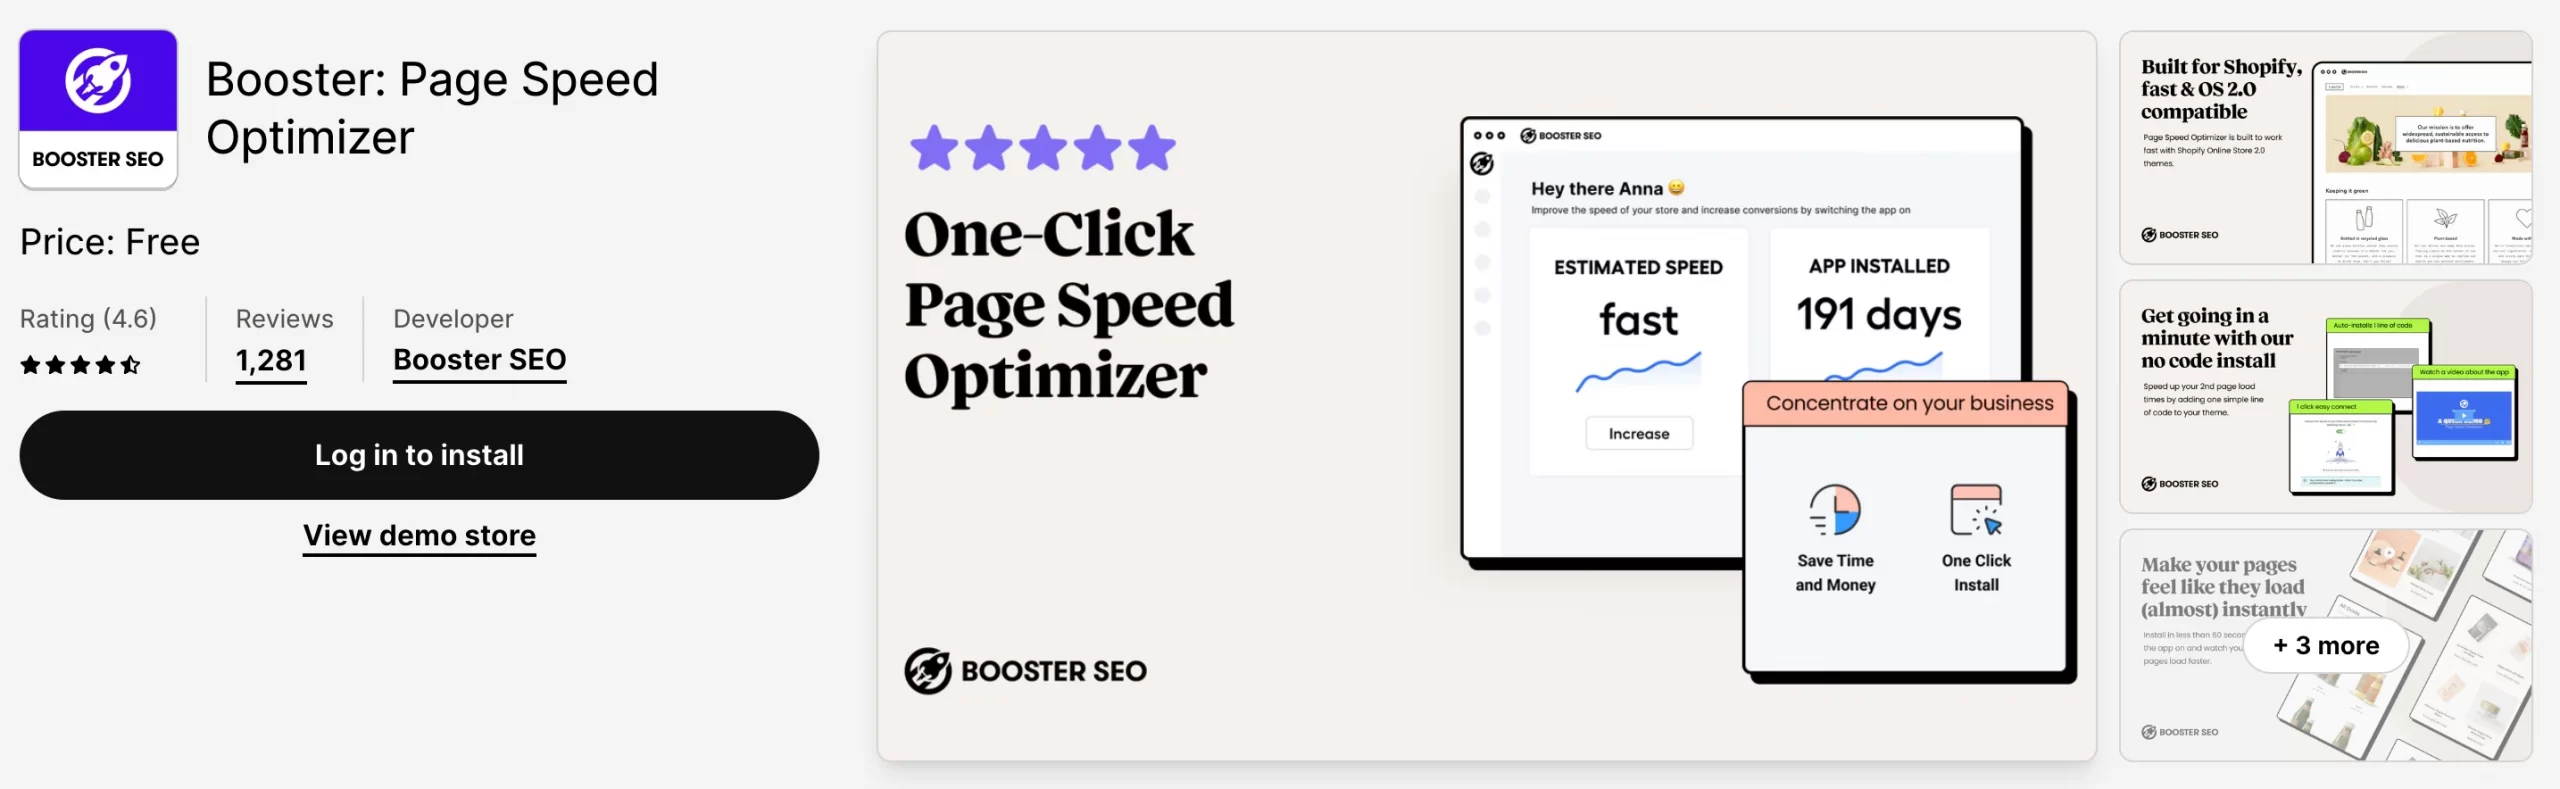 booster page speed optimizer